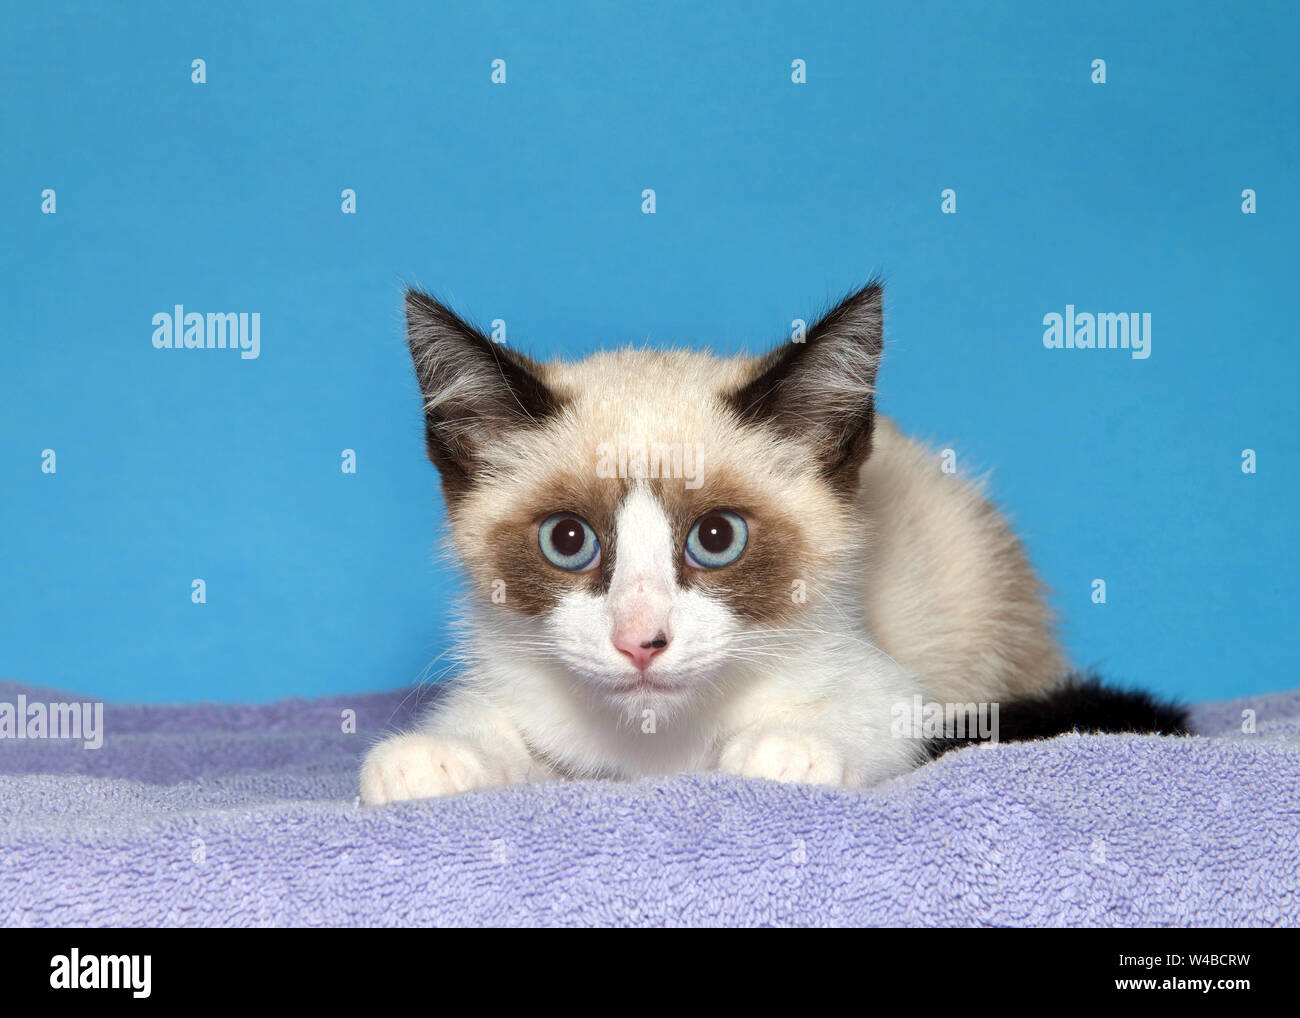 Portrait of an adorable baby seal point siamese kitten laying on a purple blanket looking directly at viewer with beautiful blue eyes, blue background Stock Photo